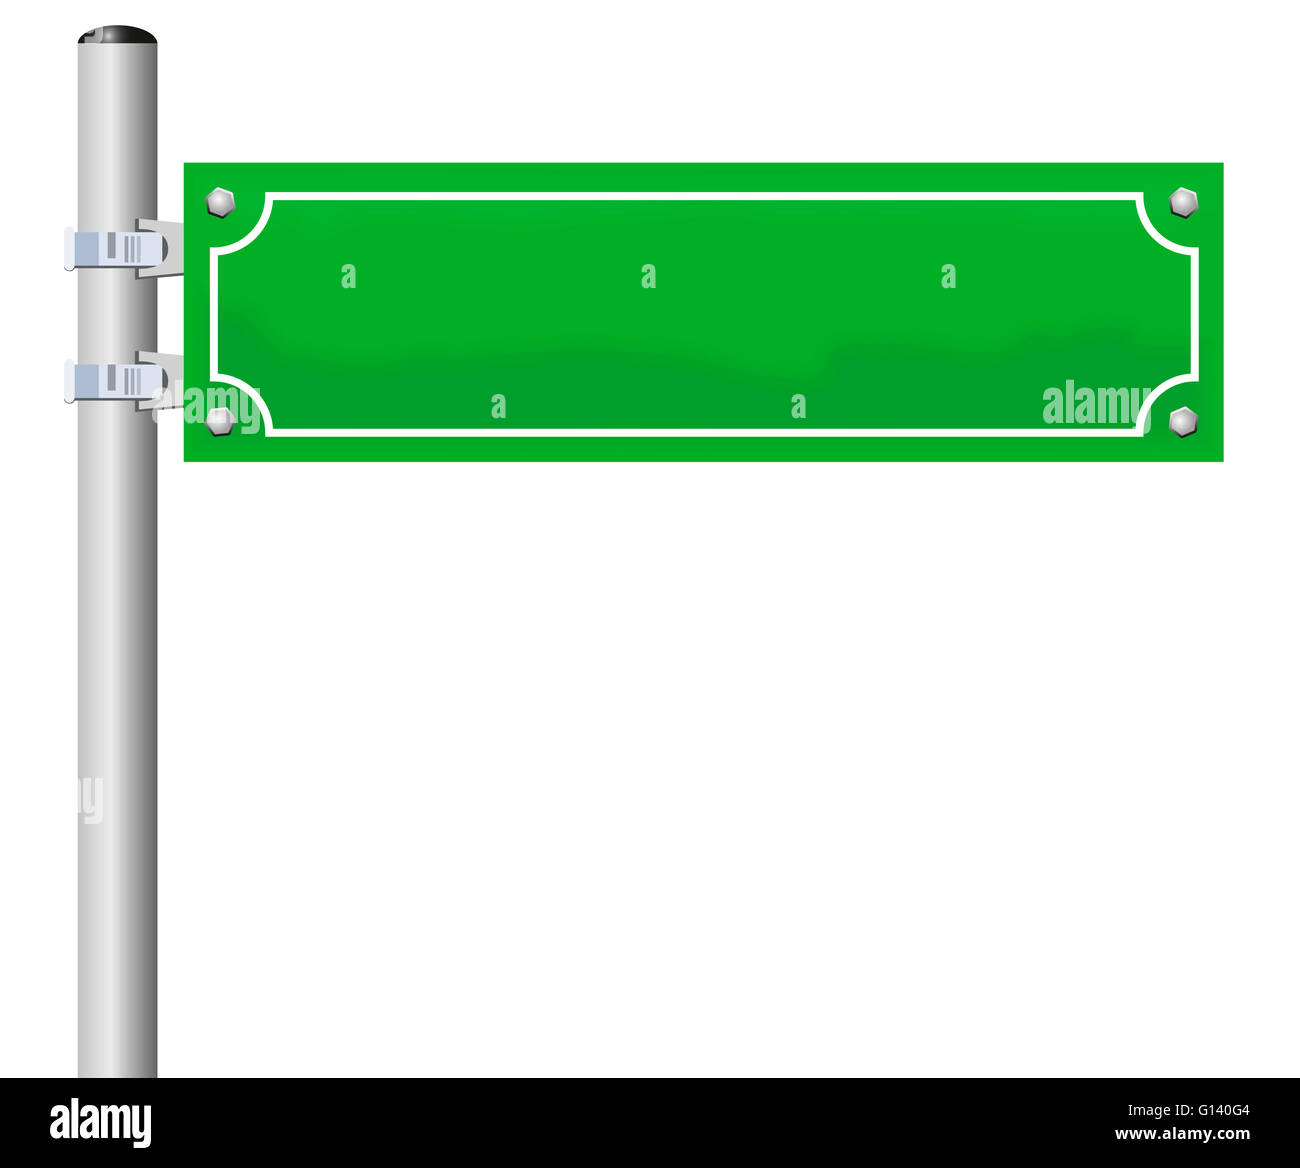 Street sign - blank, green, fixed on a pole. IIllustration on white background. Stock Photo